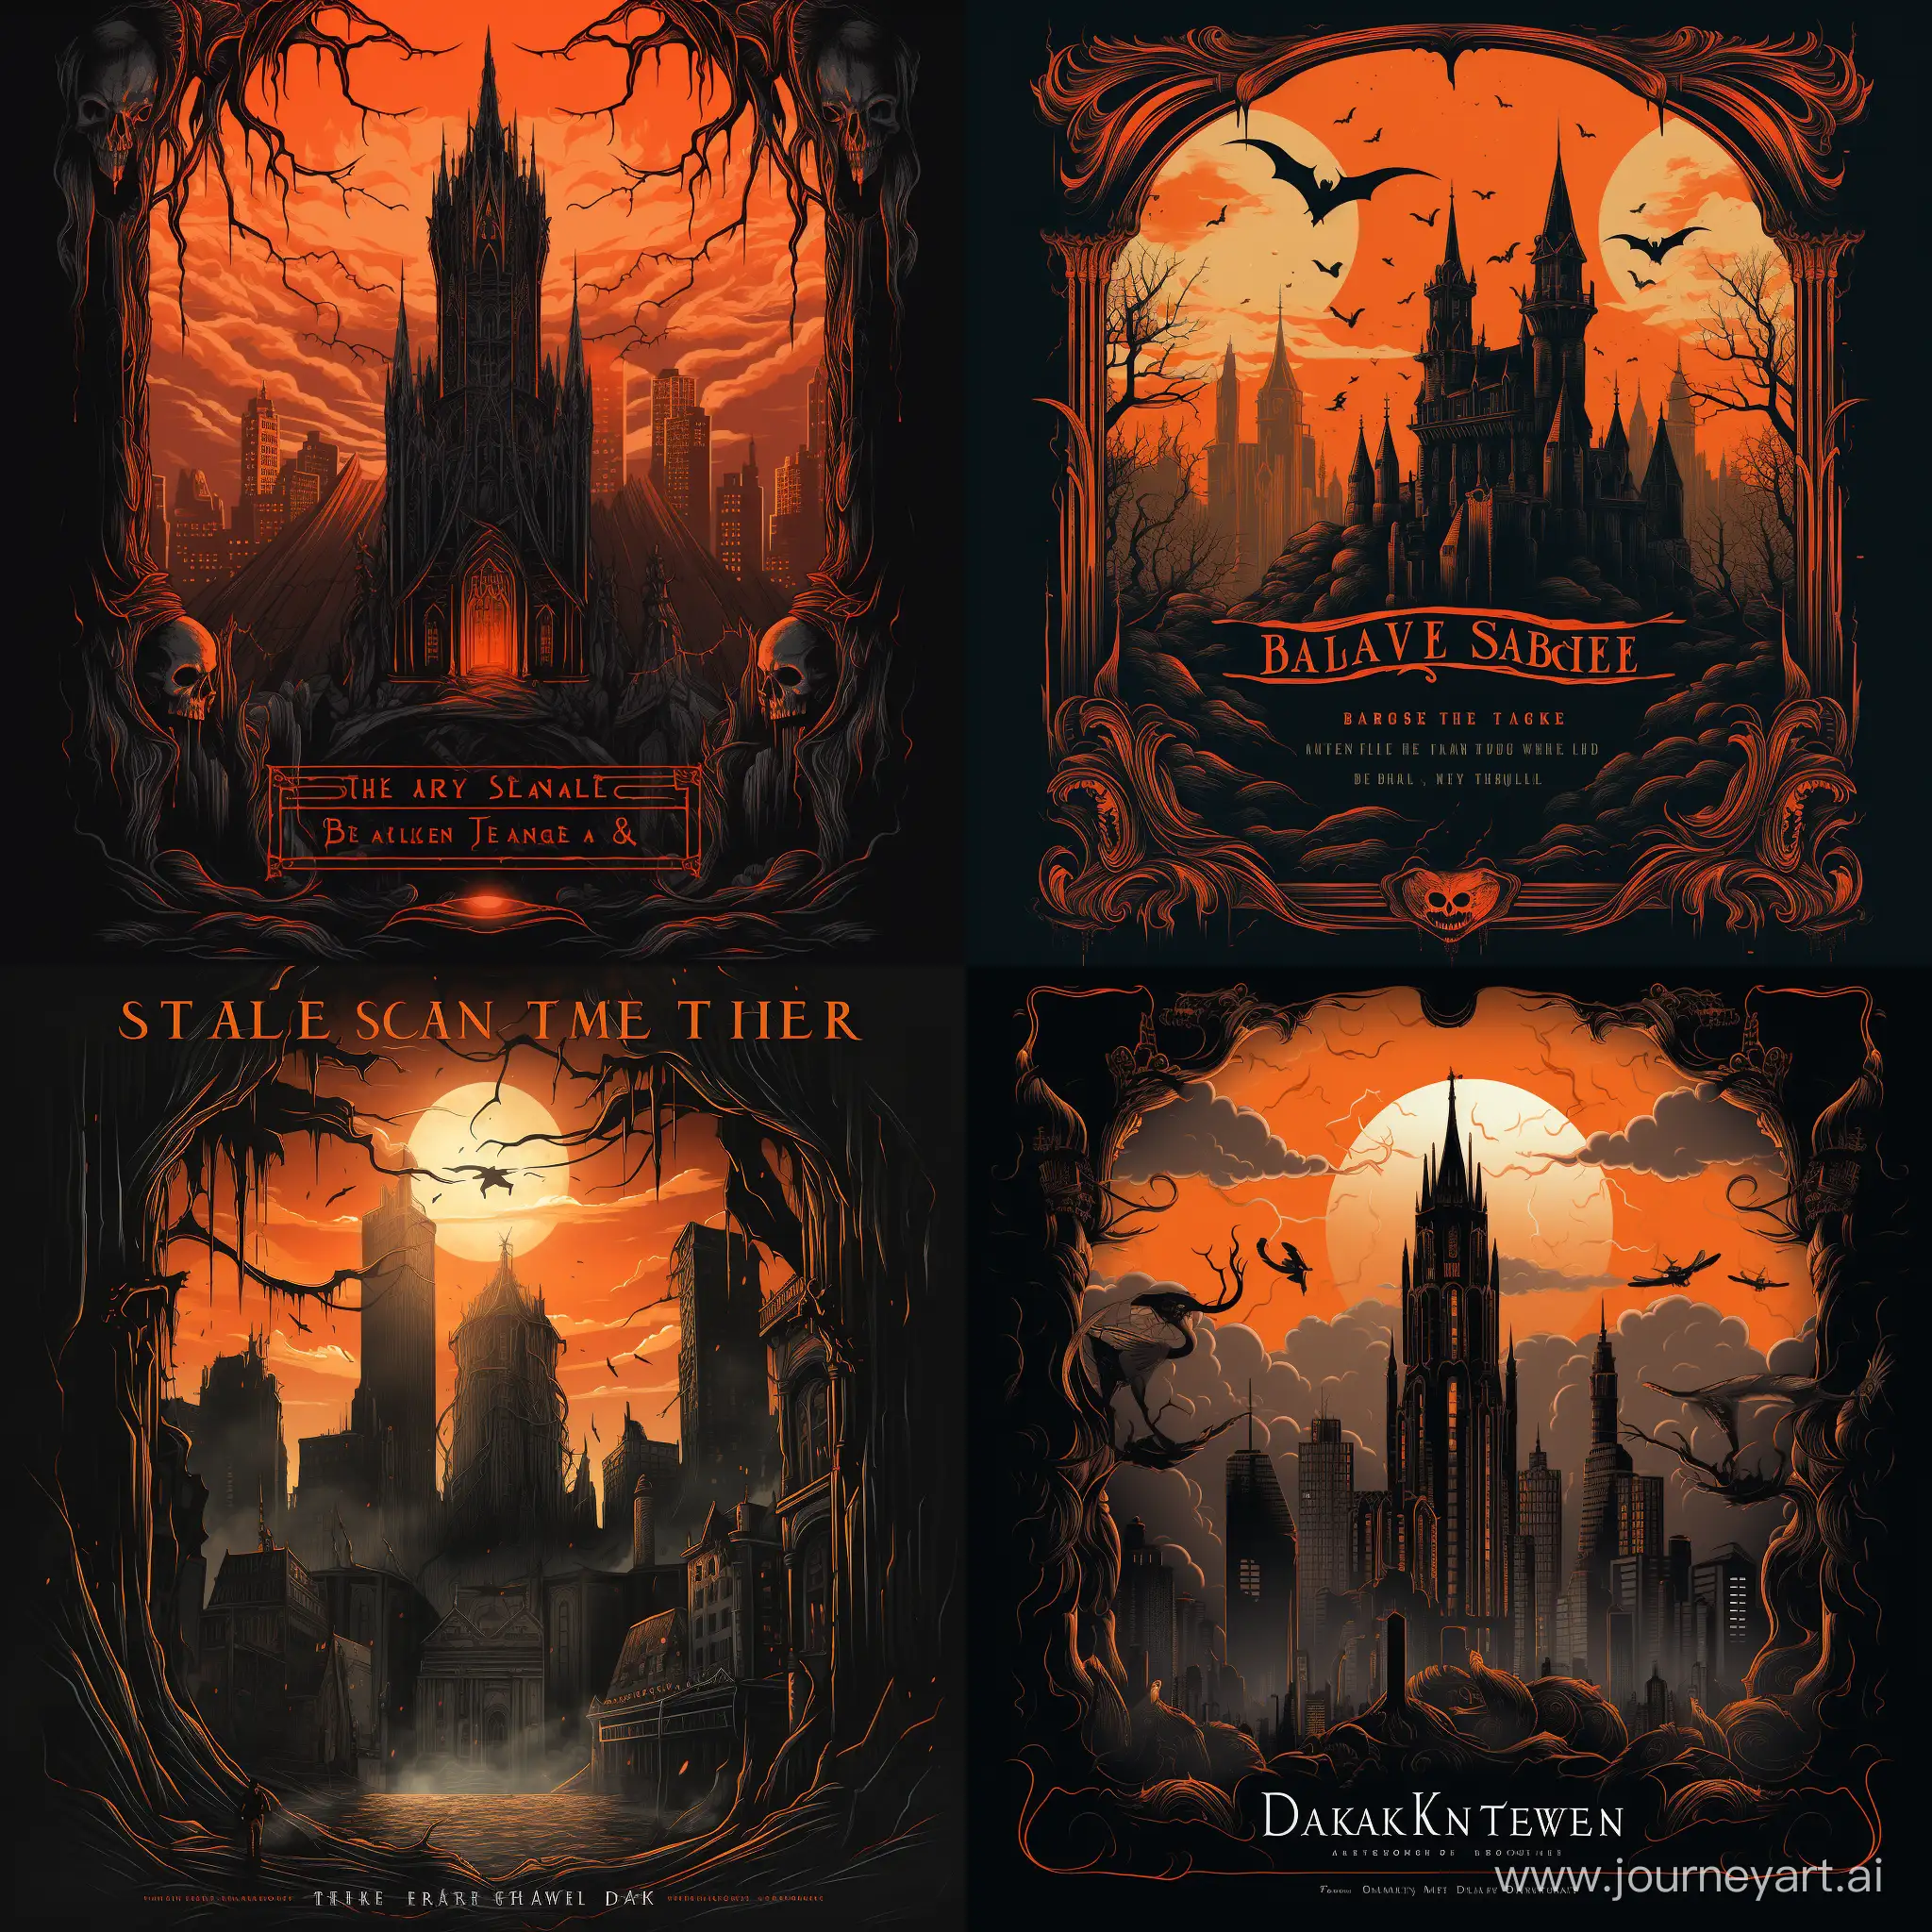 Urban-Gothic-Style-Poster-in-Black-and-Orange